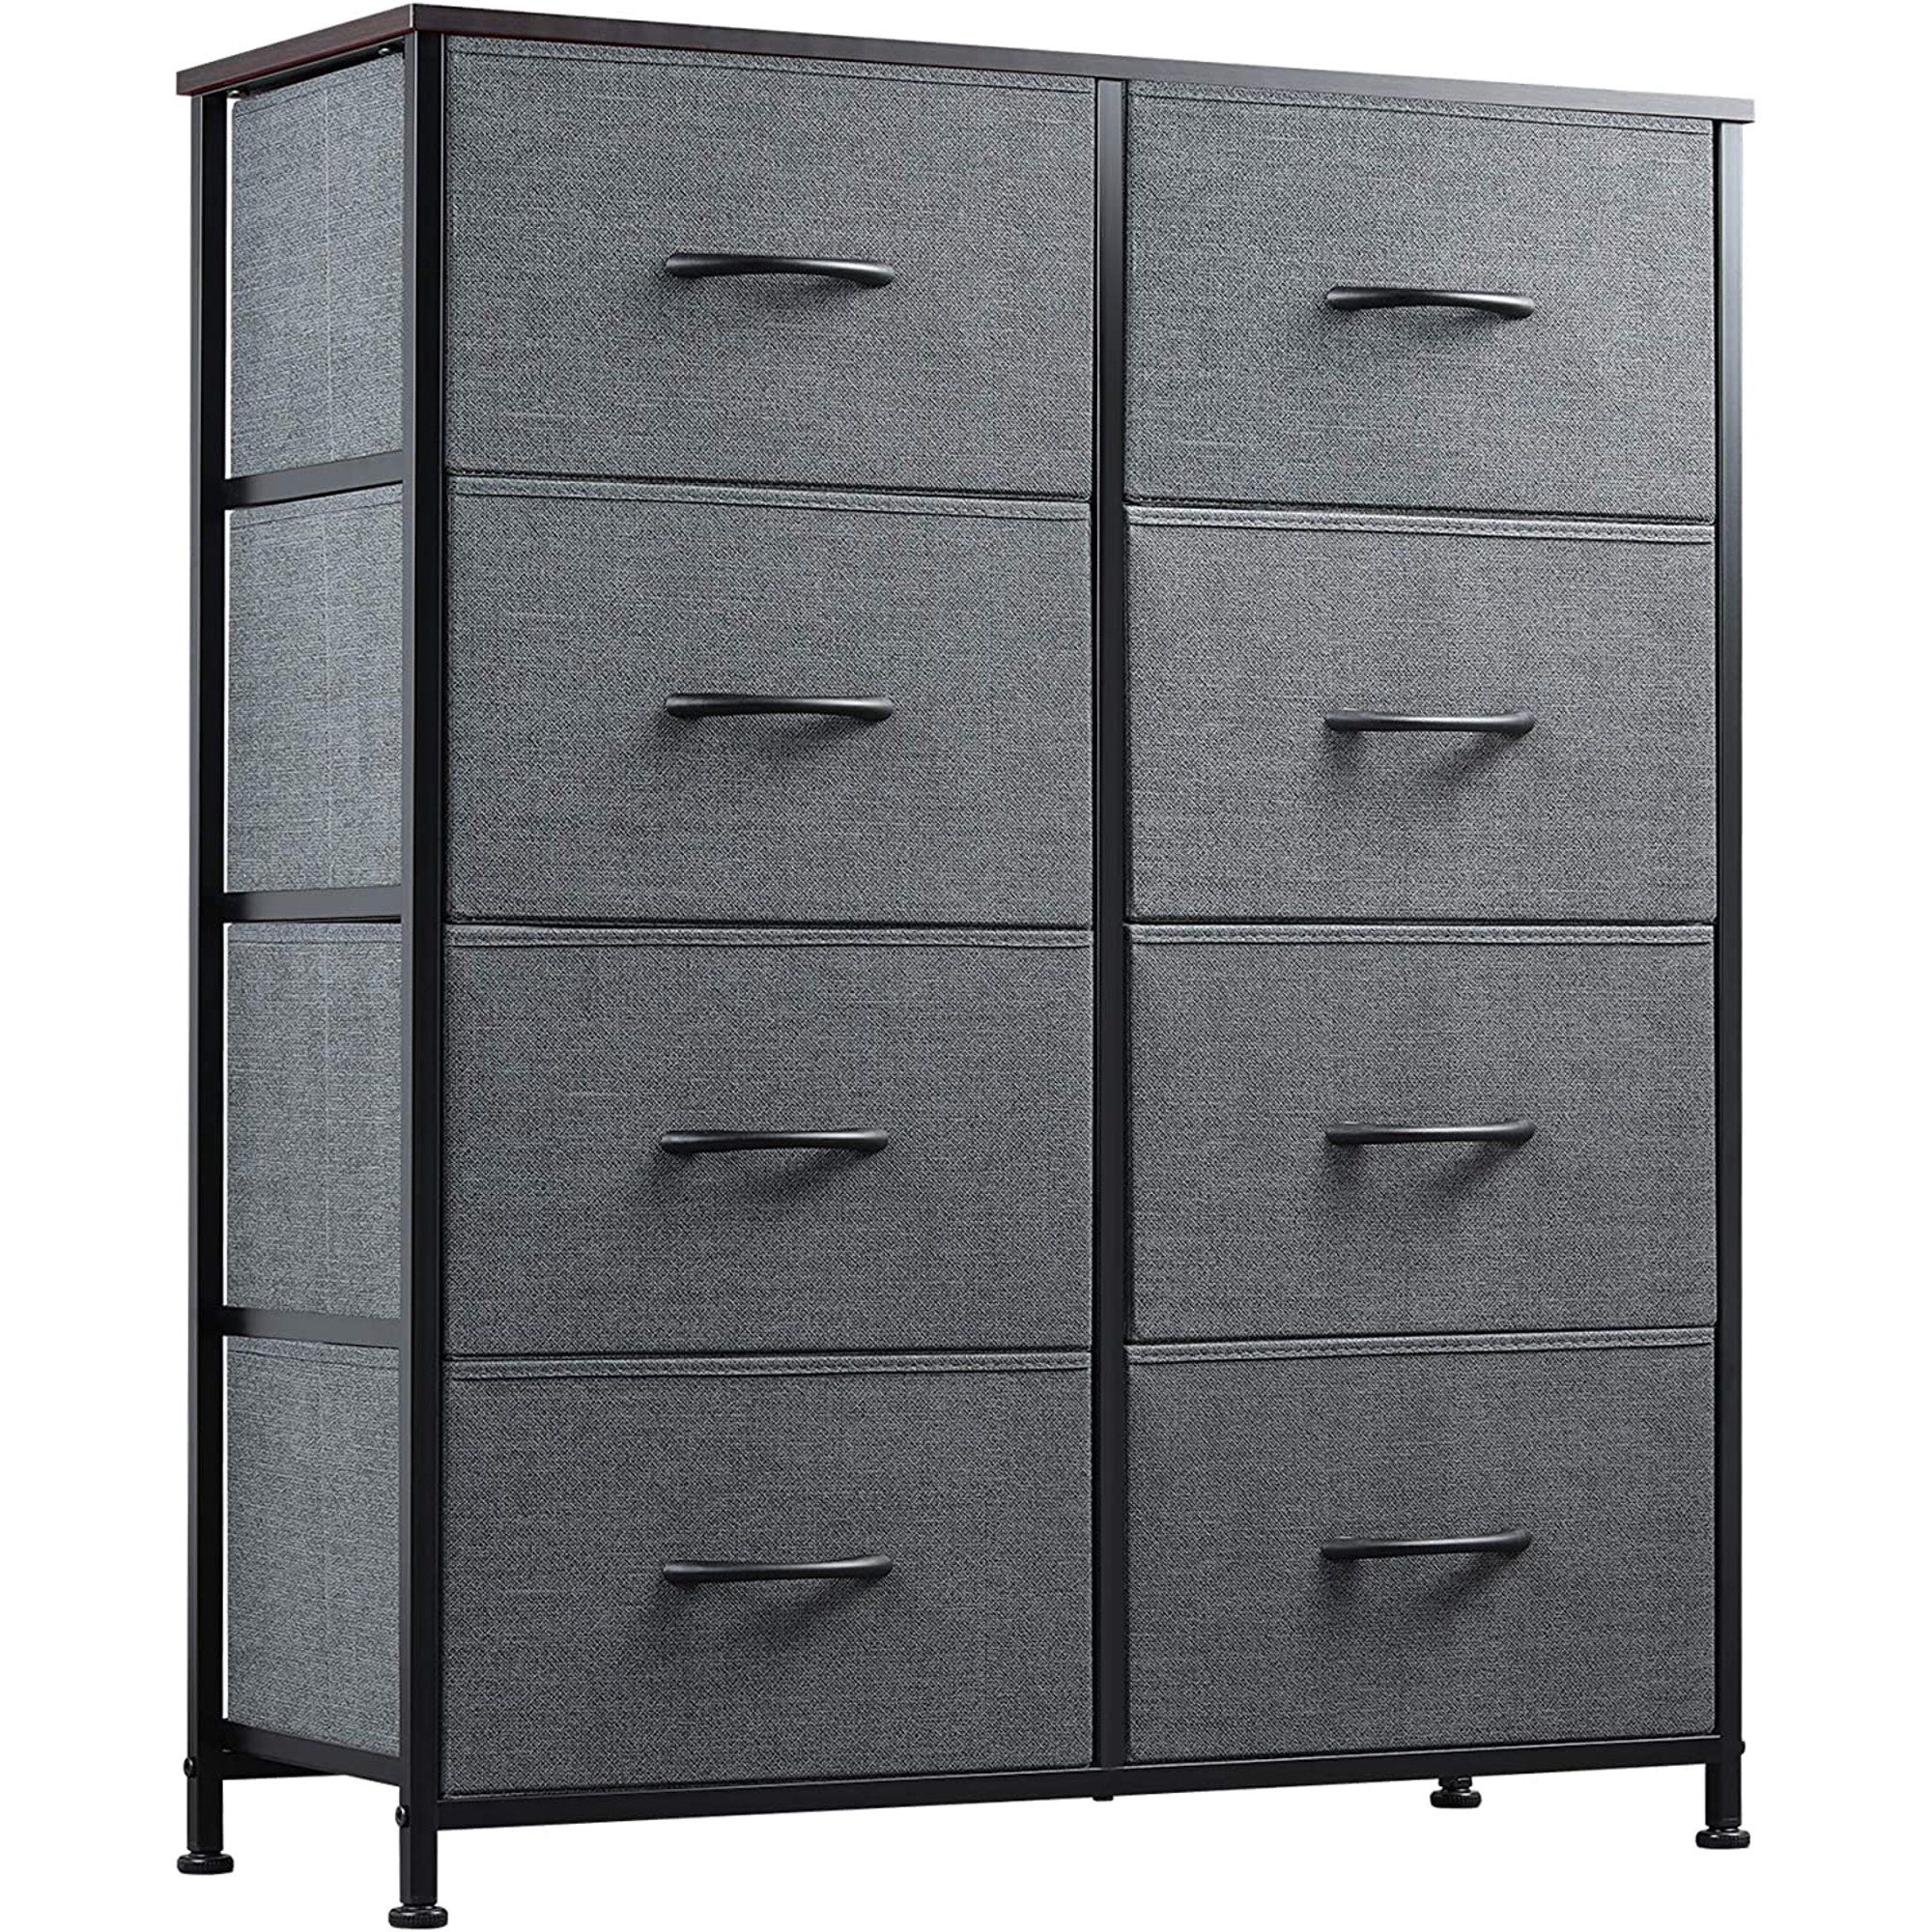 WLIVE Dresser with 8 Drawers, Fabric Storage Tower, Organizer Unit for Bedroom, Living Room | Walmart (US)